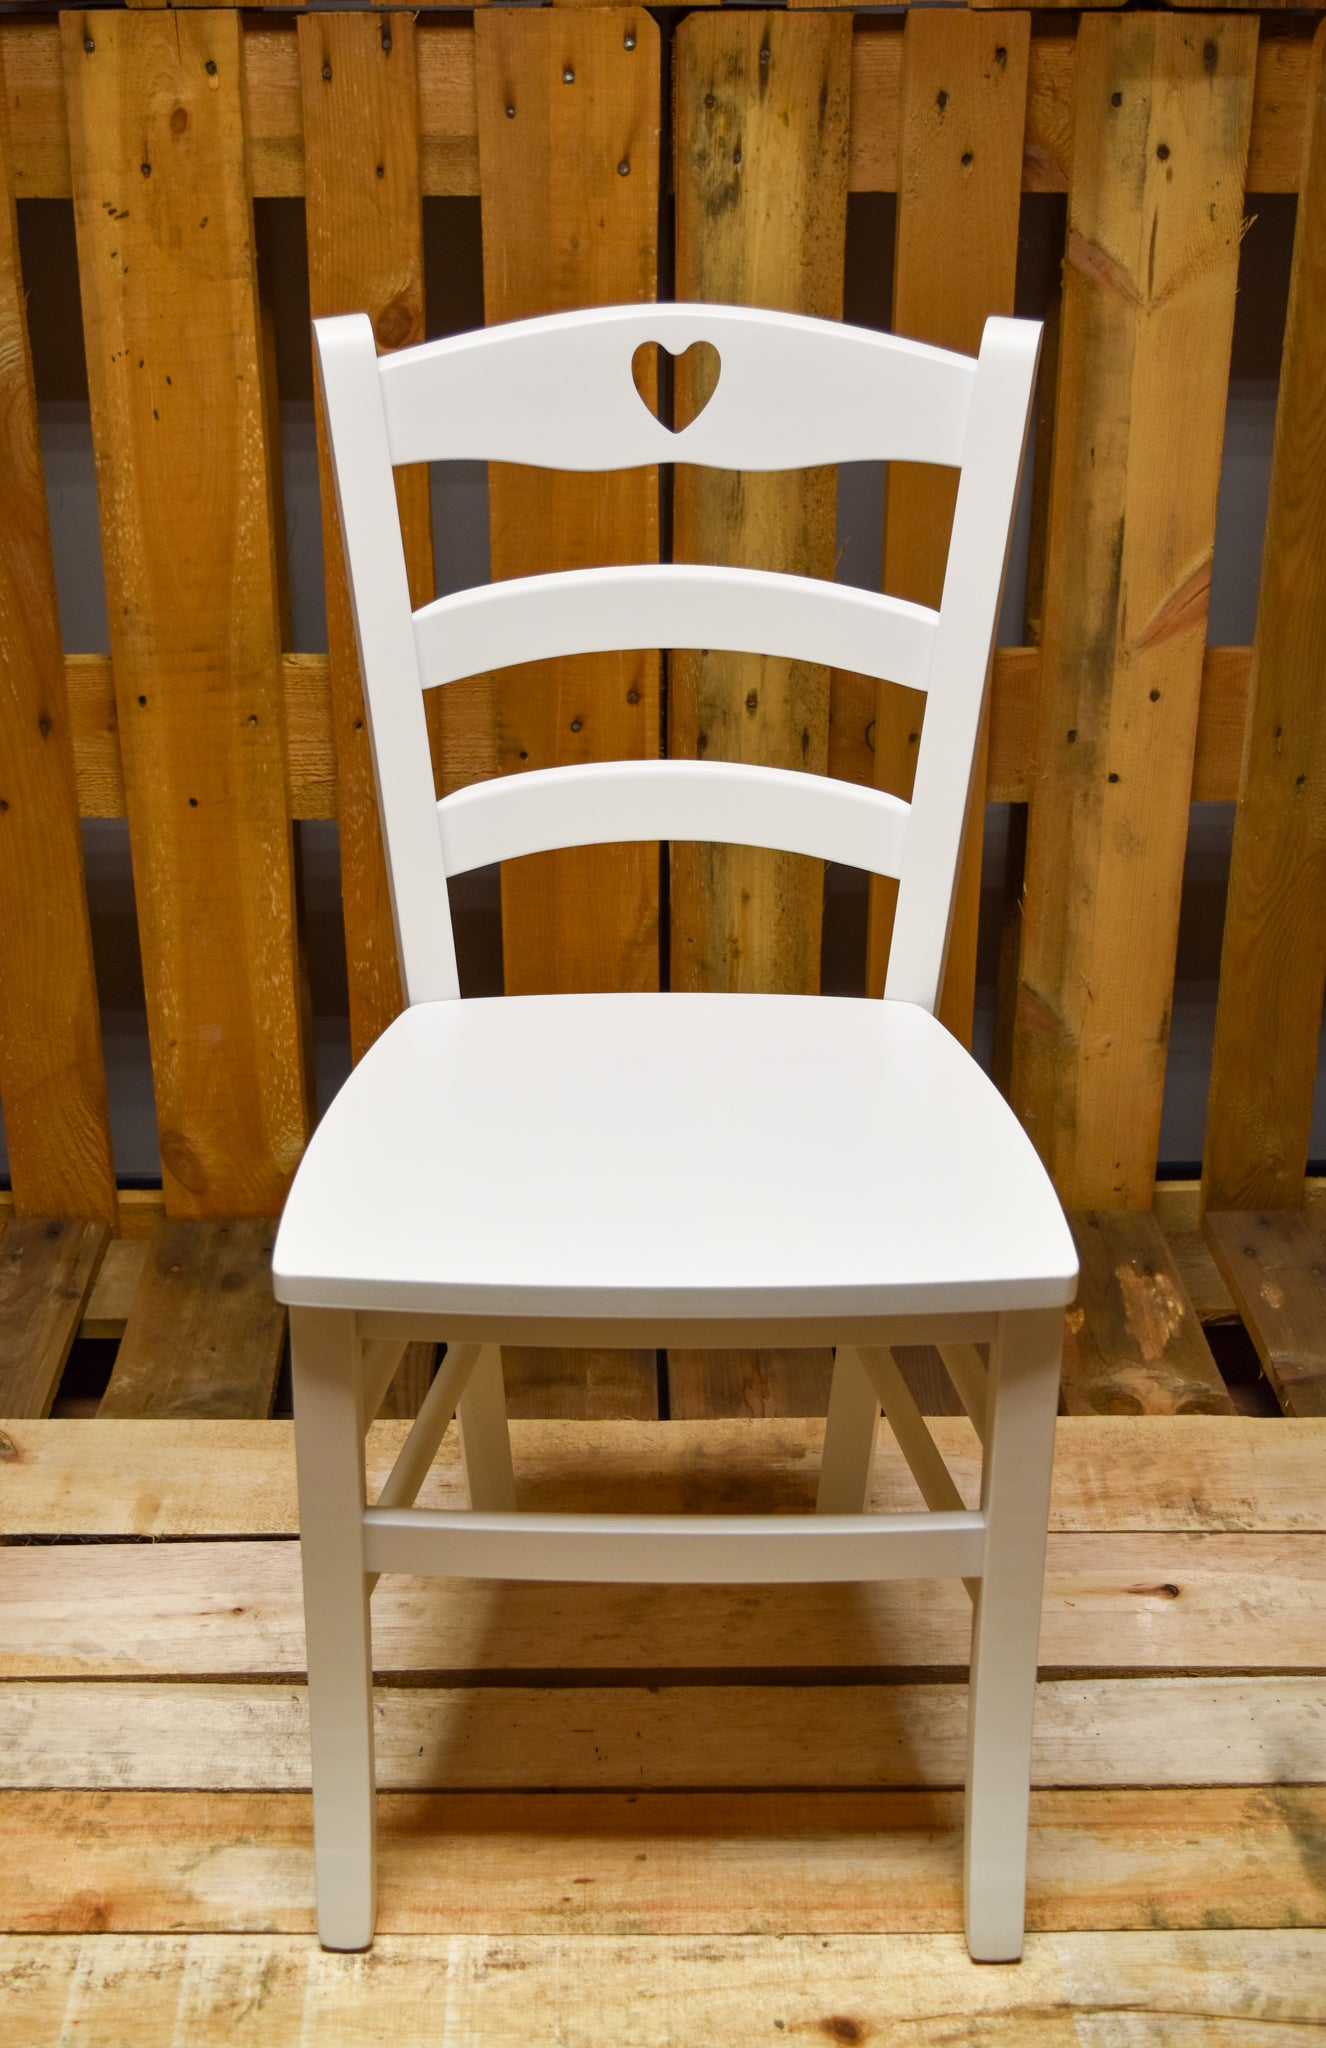 Stock chairs model 25 lacquered white color wooden seat